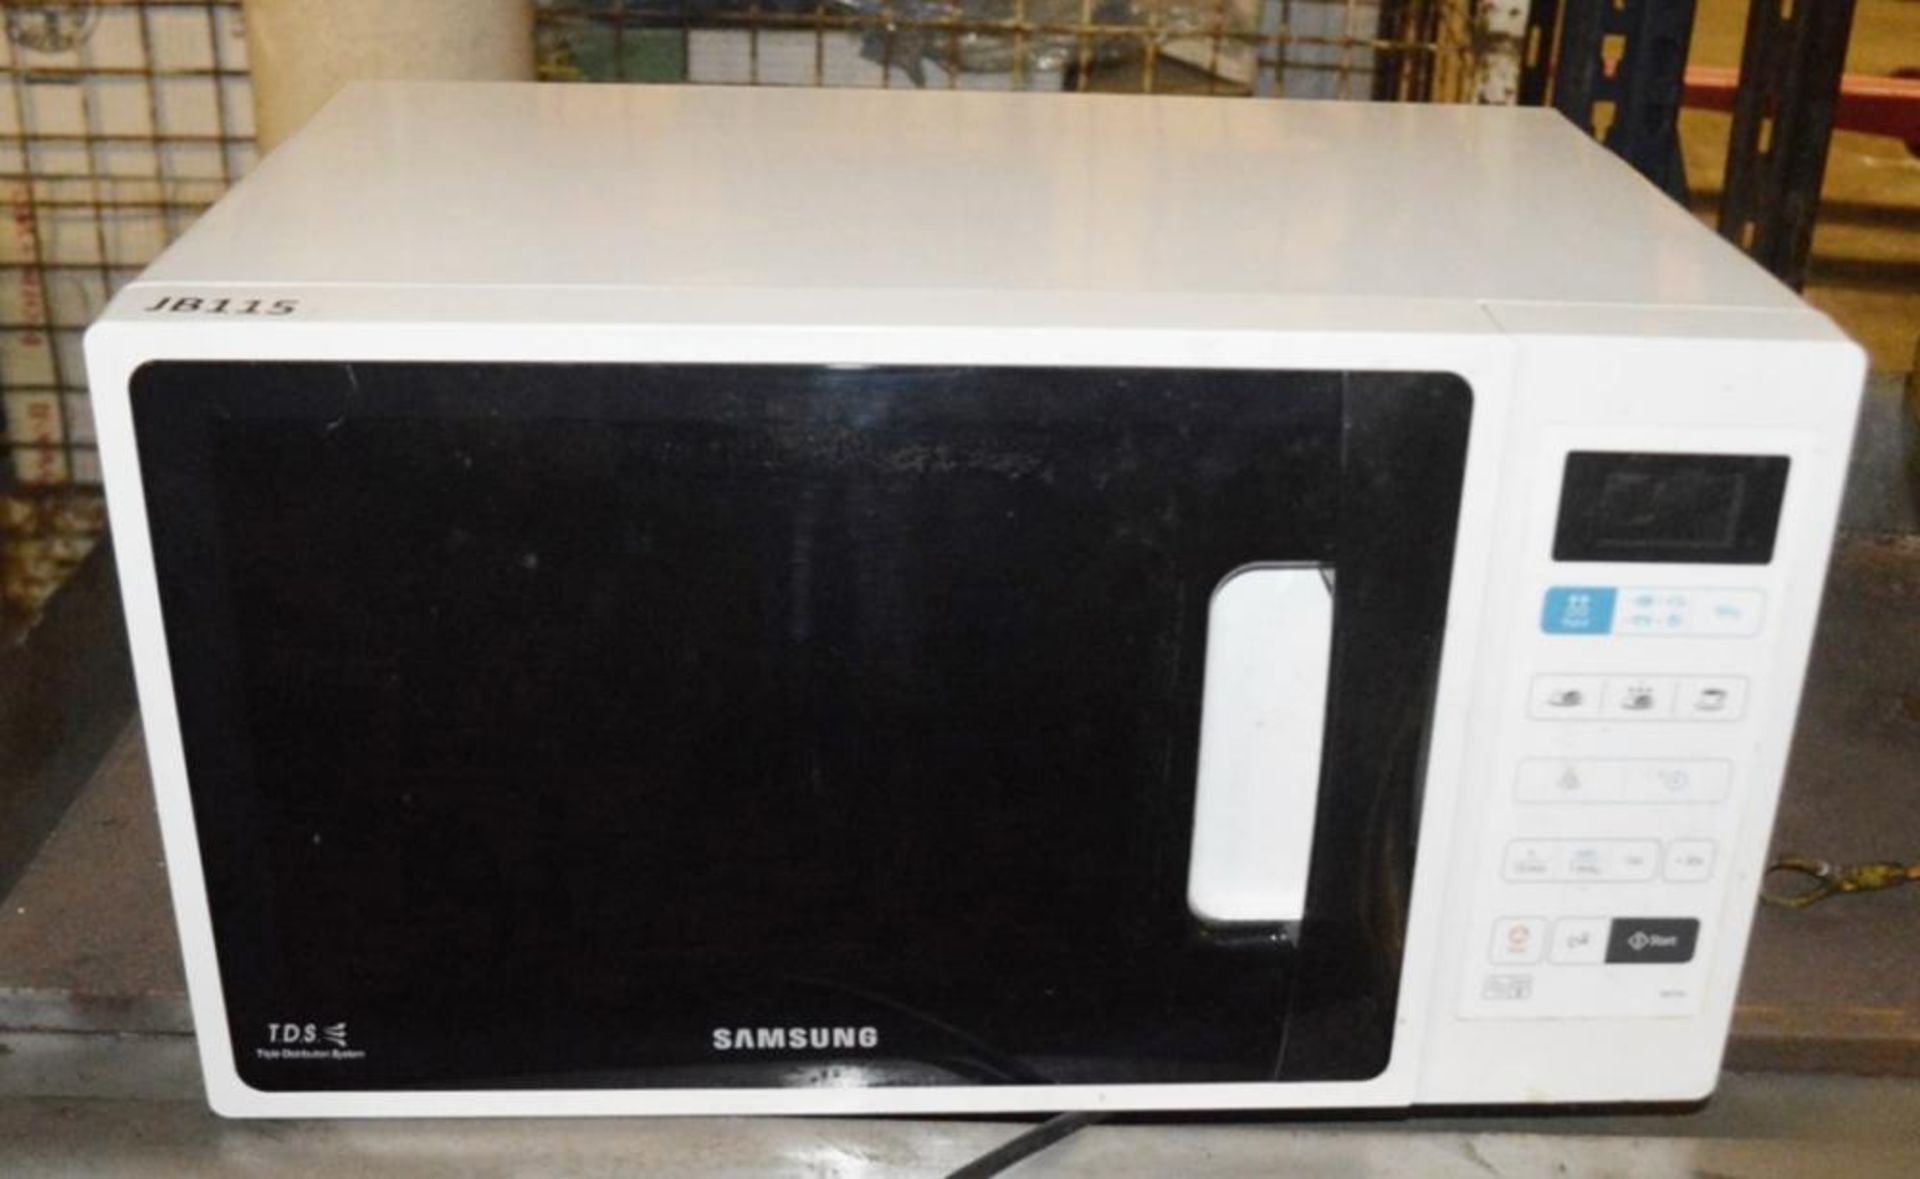 1 x Samsung Microwave Oven - Model ME73A - 800w - 20 Litre Capacity - Low Start, No Reserve - Ref JB